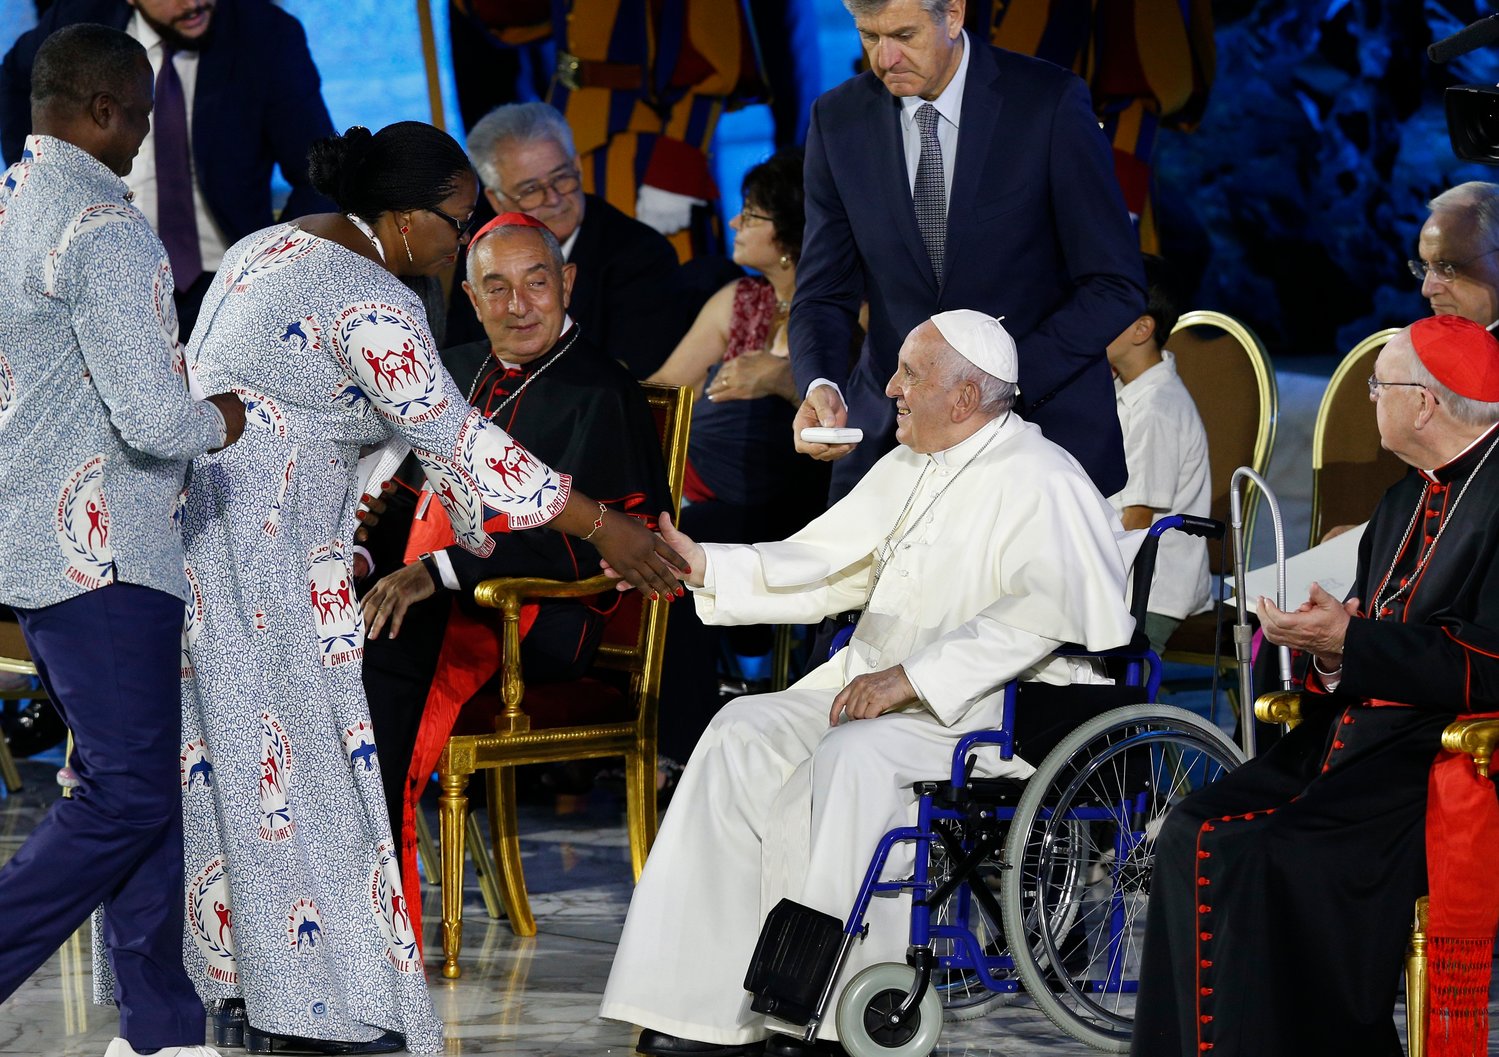 Pope Francis greets Paul and Germaine Balenza of Congo after the couple spoke at the opening of the World Meeting of Families in the Paul VI hall at the Vatican June 22.